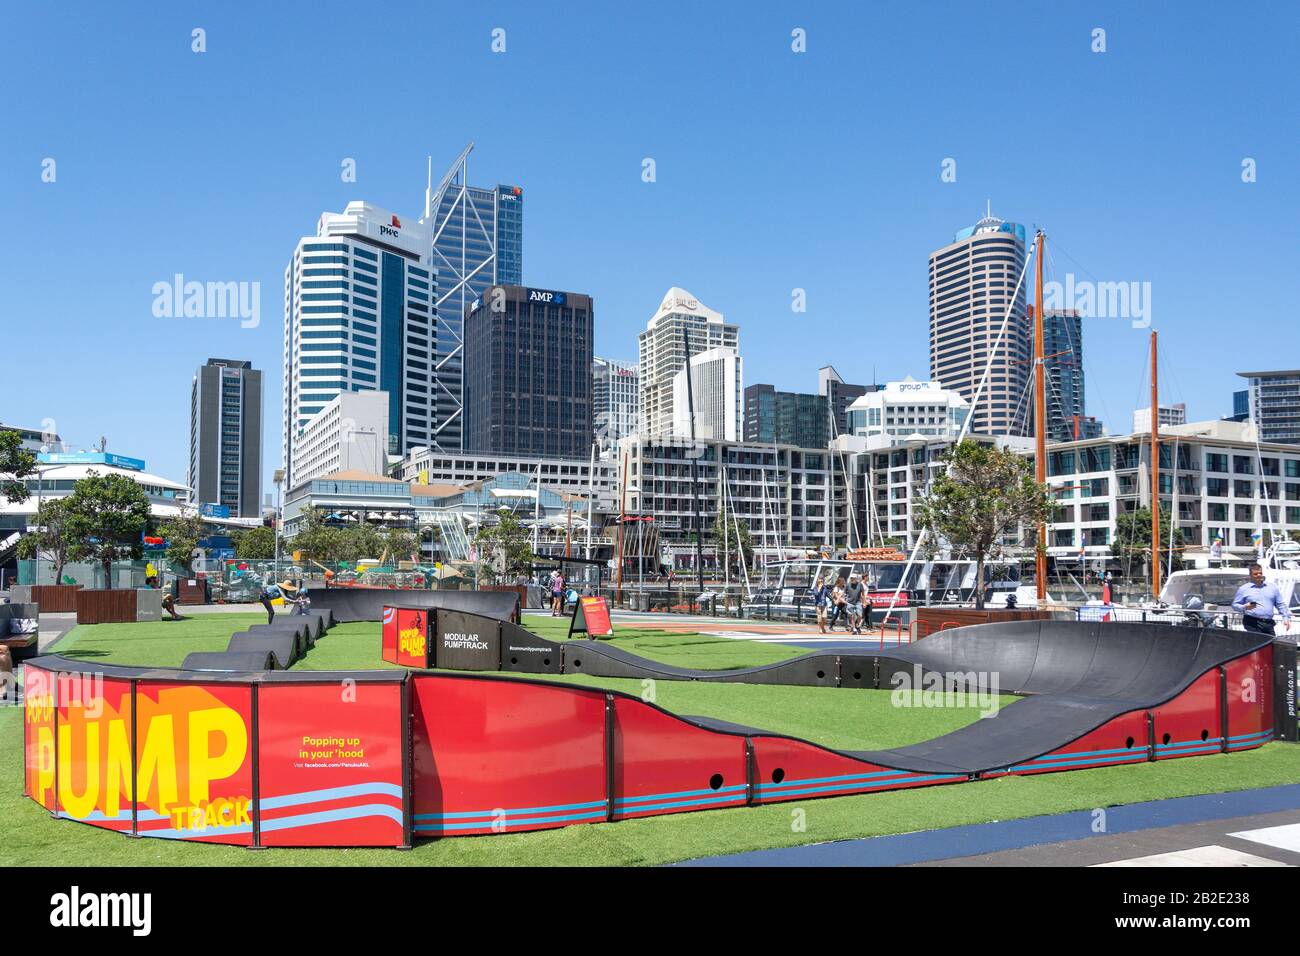 Pop-up Pump Track, Viaduct Harbour, Auckland Waterfront, City Centre, Auckland, Auckland Region, New Zealand Stock Photo